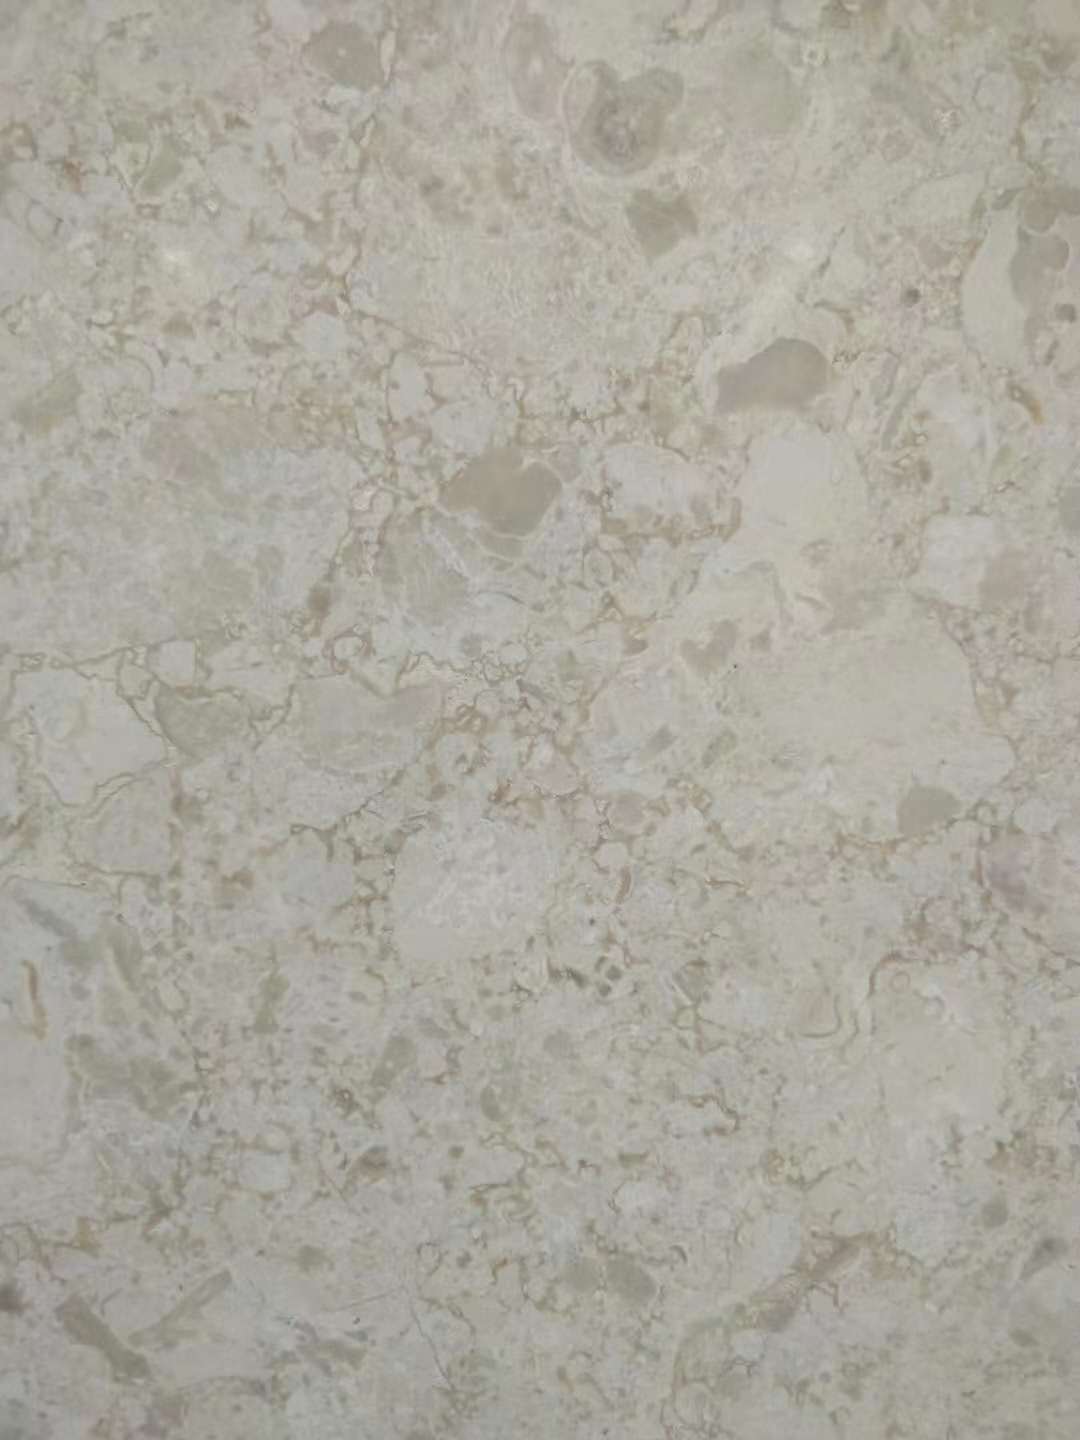 White Gold Marble Slab Beige Marble White Beige Marble Stone for Home Design